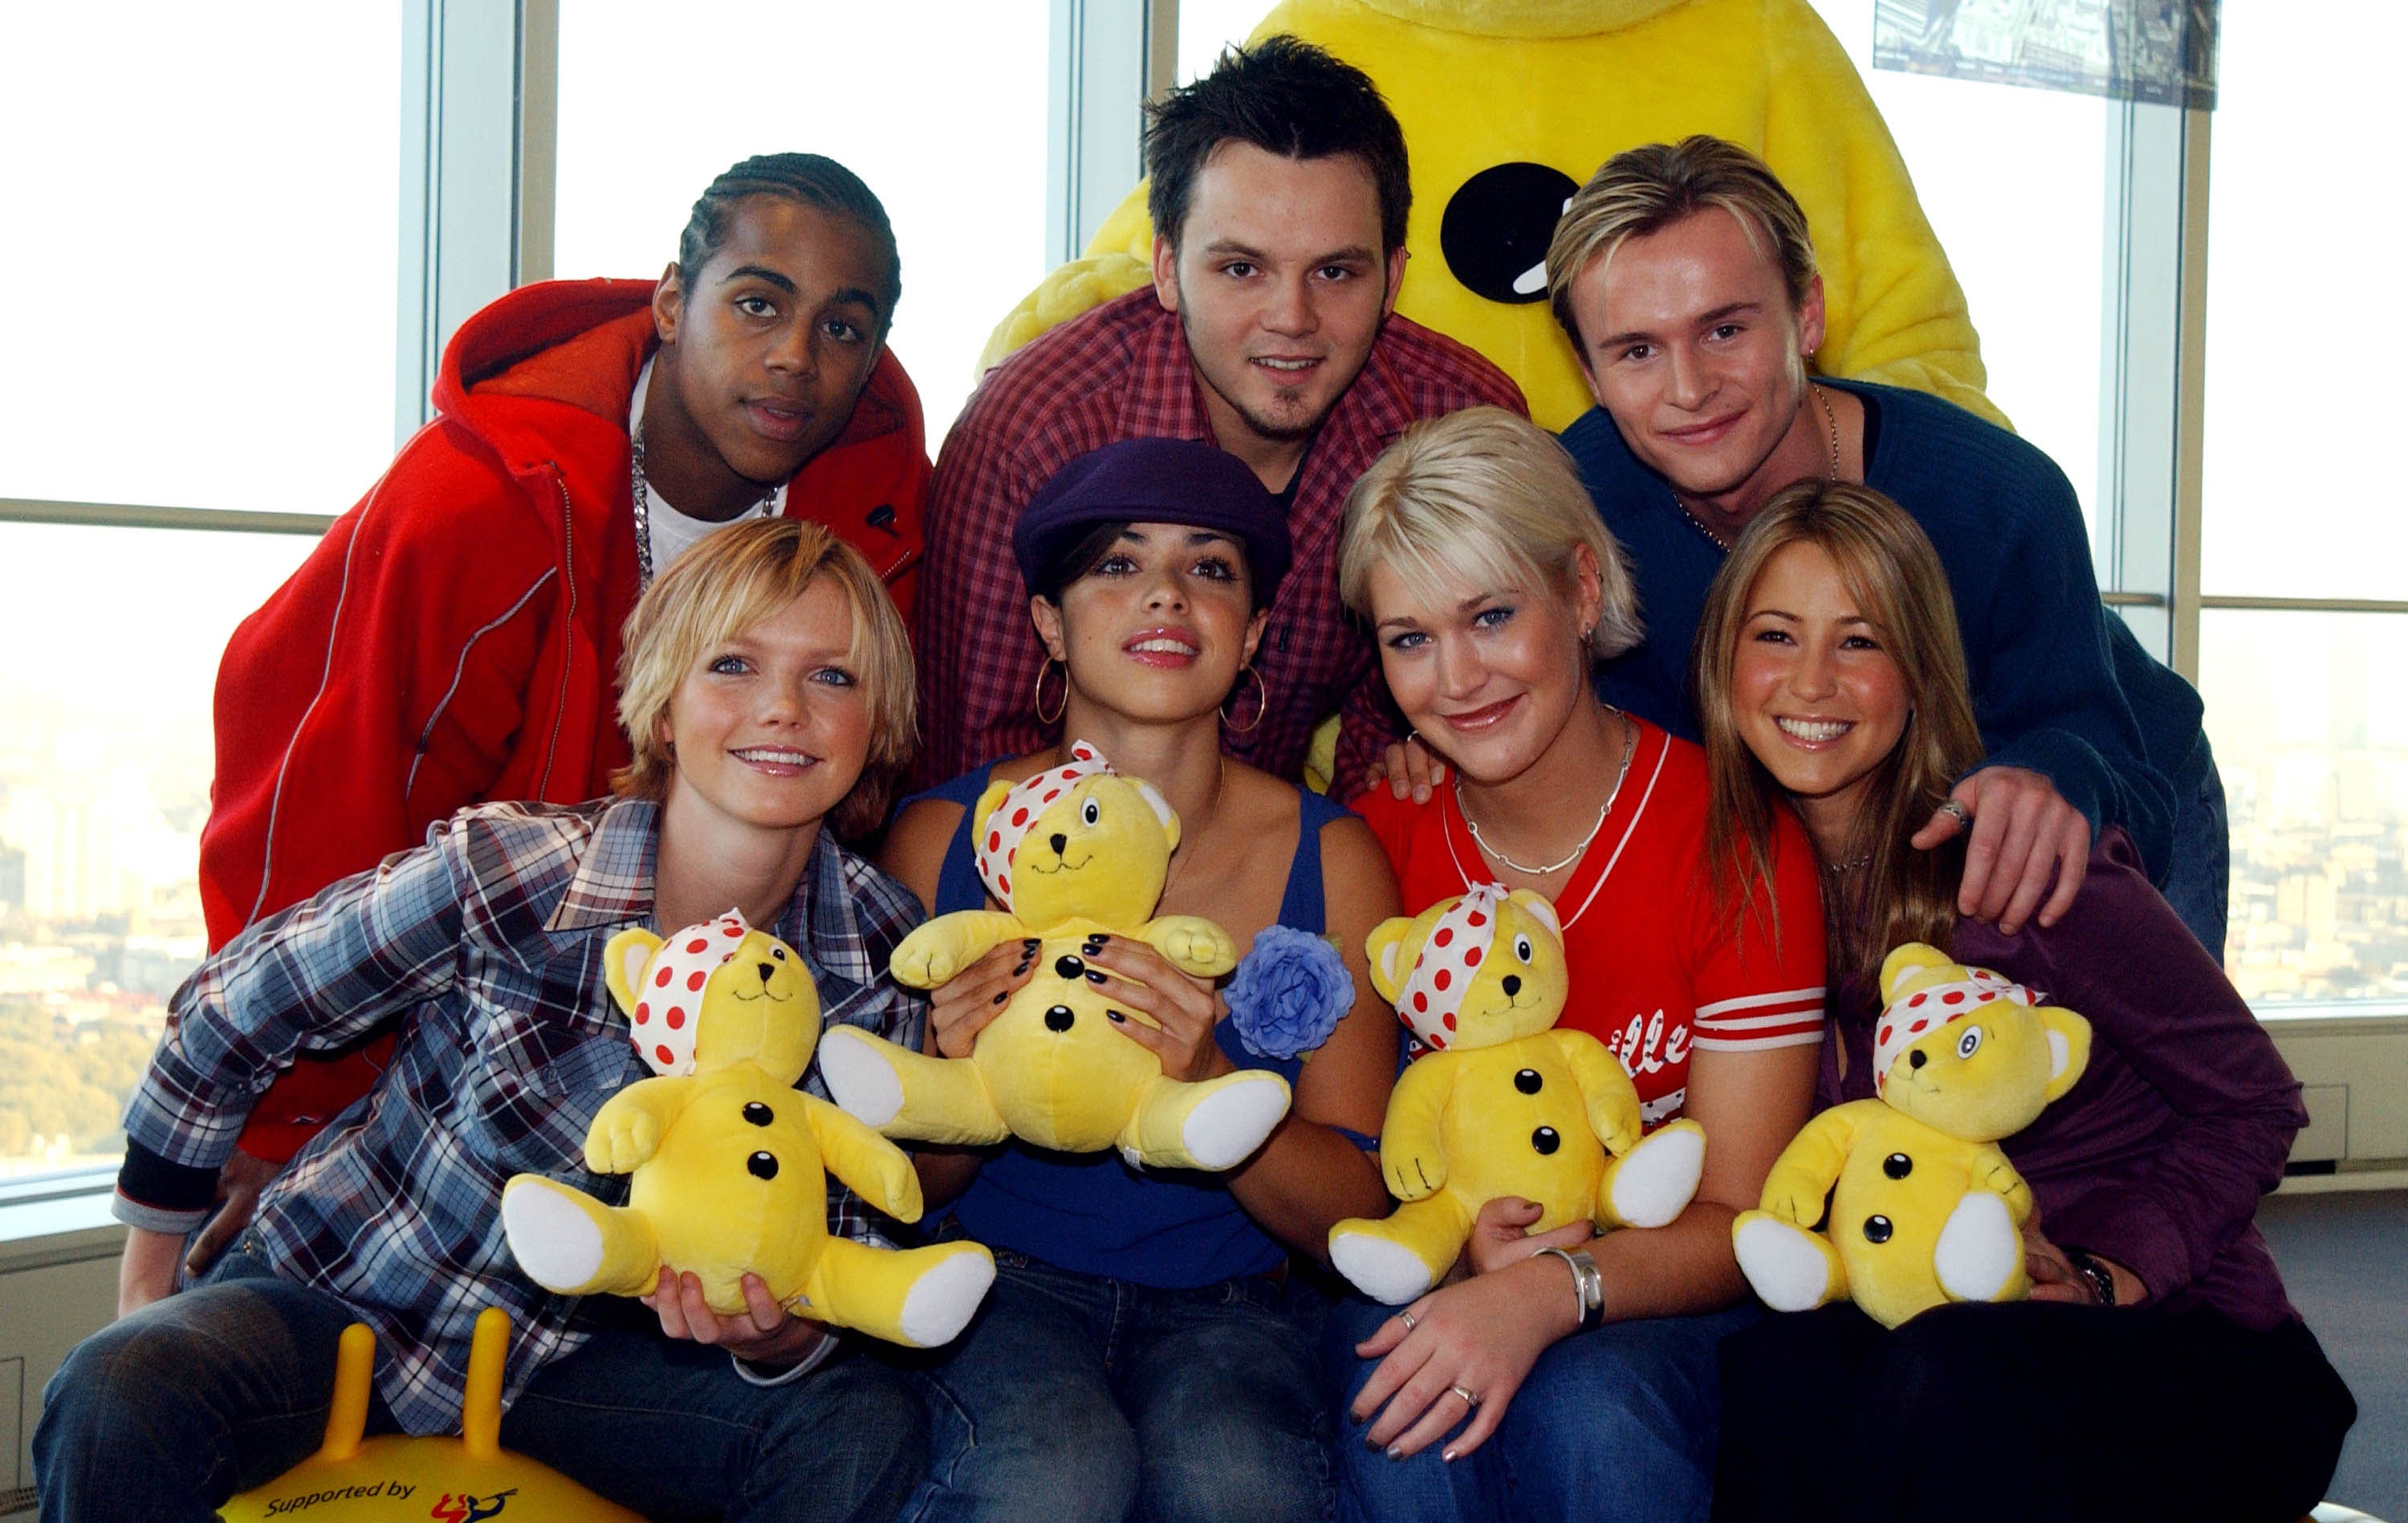 Spearritt (front left) with S Club 7 in 2001